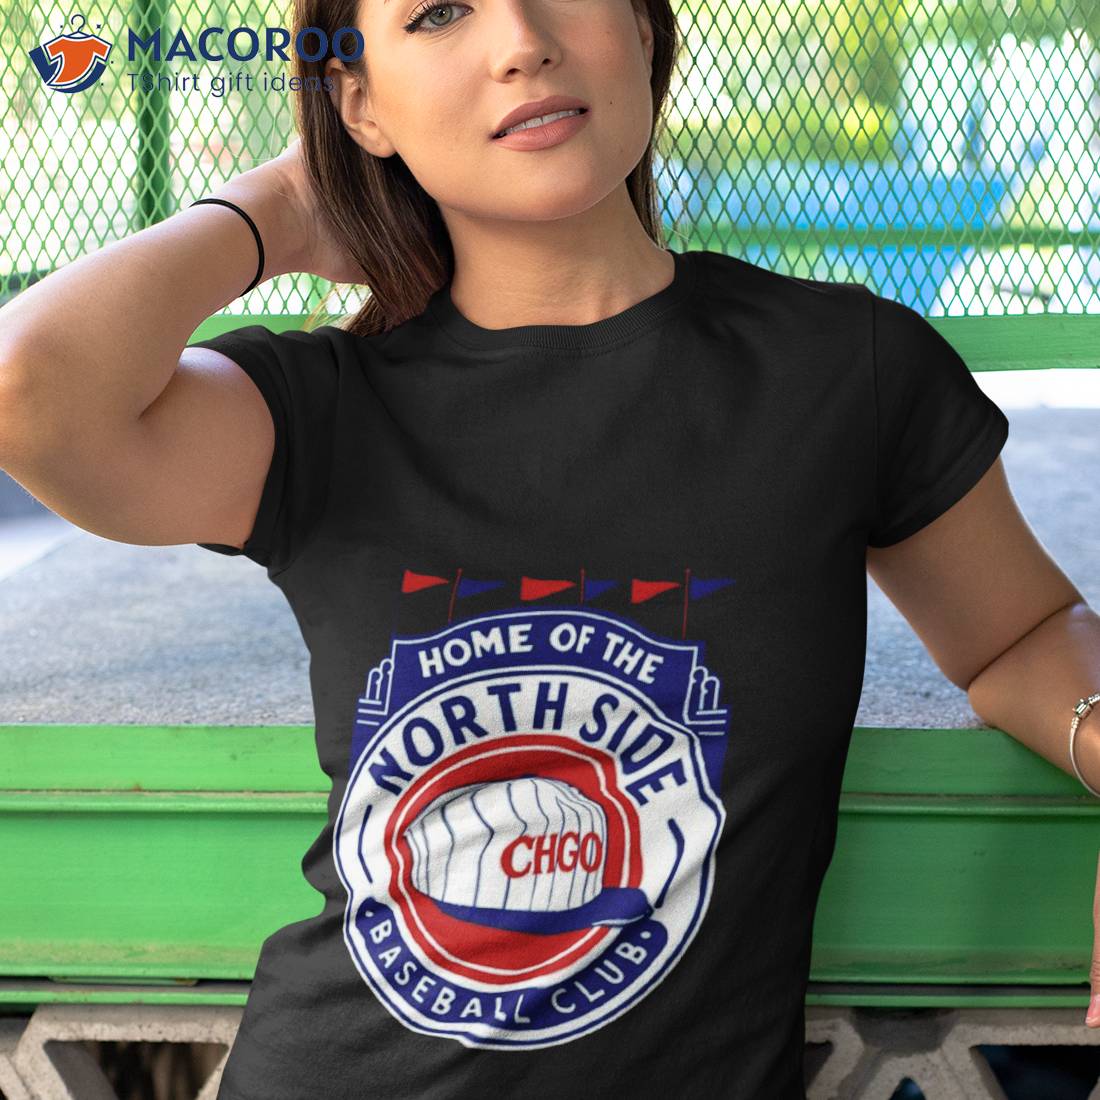 Chicago Cubs North Side T-shirt 